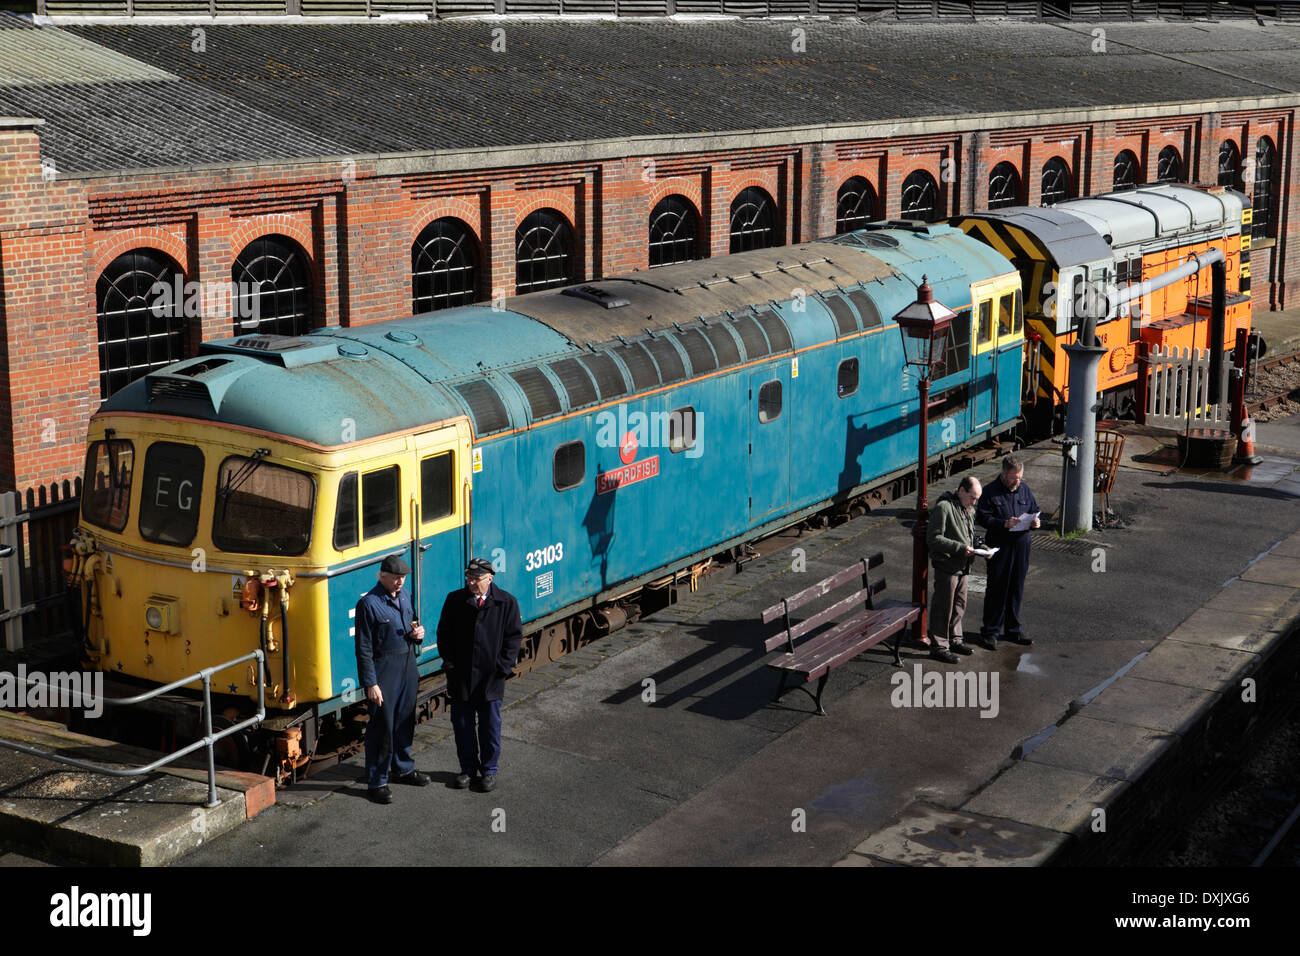 Class 33/1 33103 'Swordfish' and Class 9 09018 beside engine sheds and platform at Sheffield Park station, Bluebell Railway Stock Photo